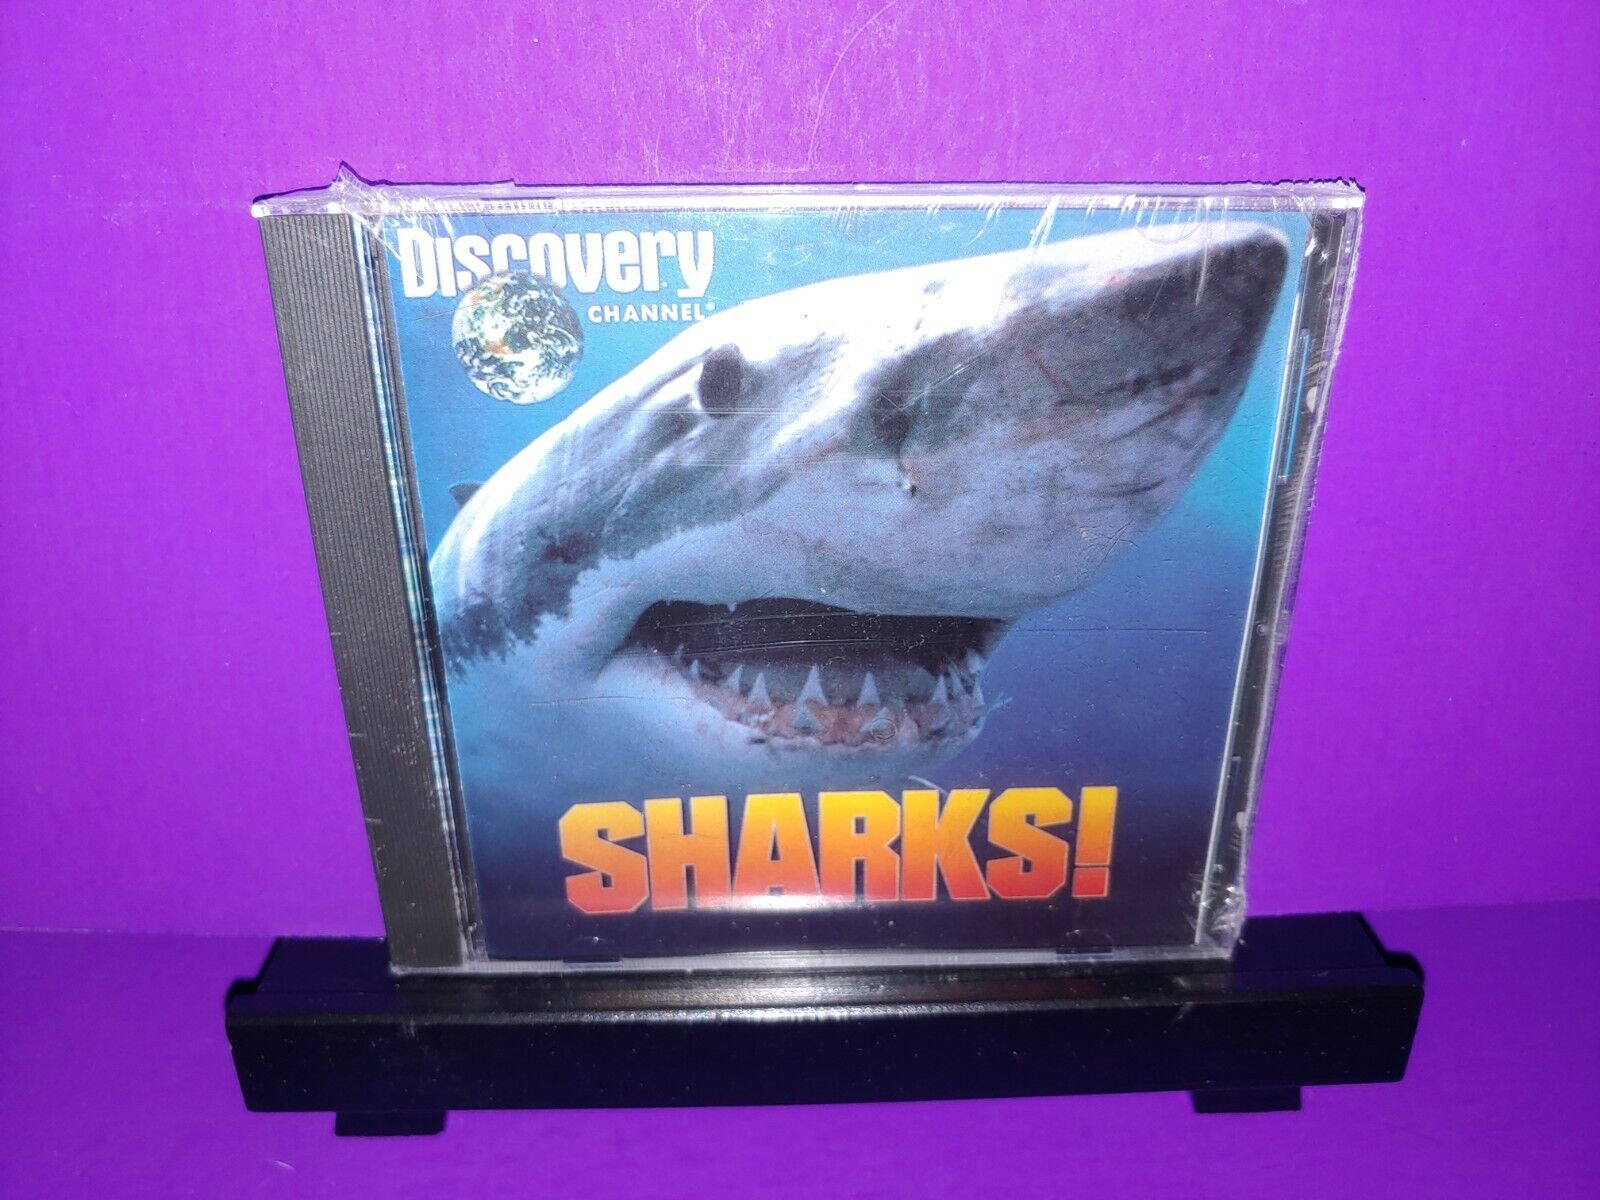 Discovery Channel Sharks PC CD ROM - MS-DOS Or PC-DOS 3.1 Later Brand New B455